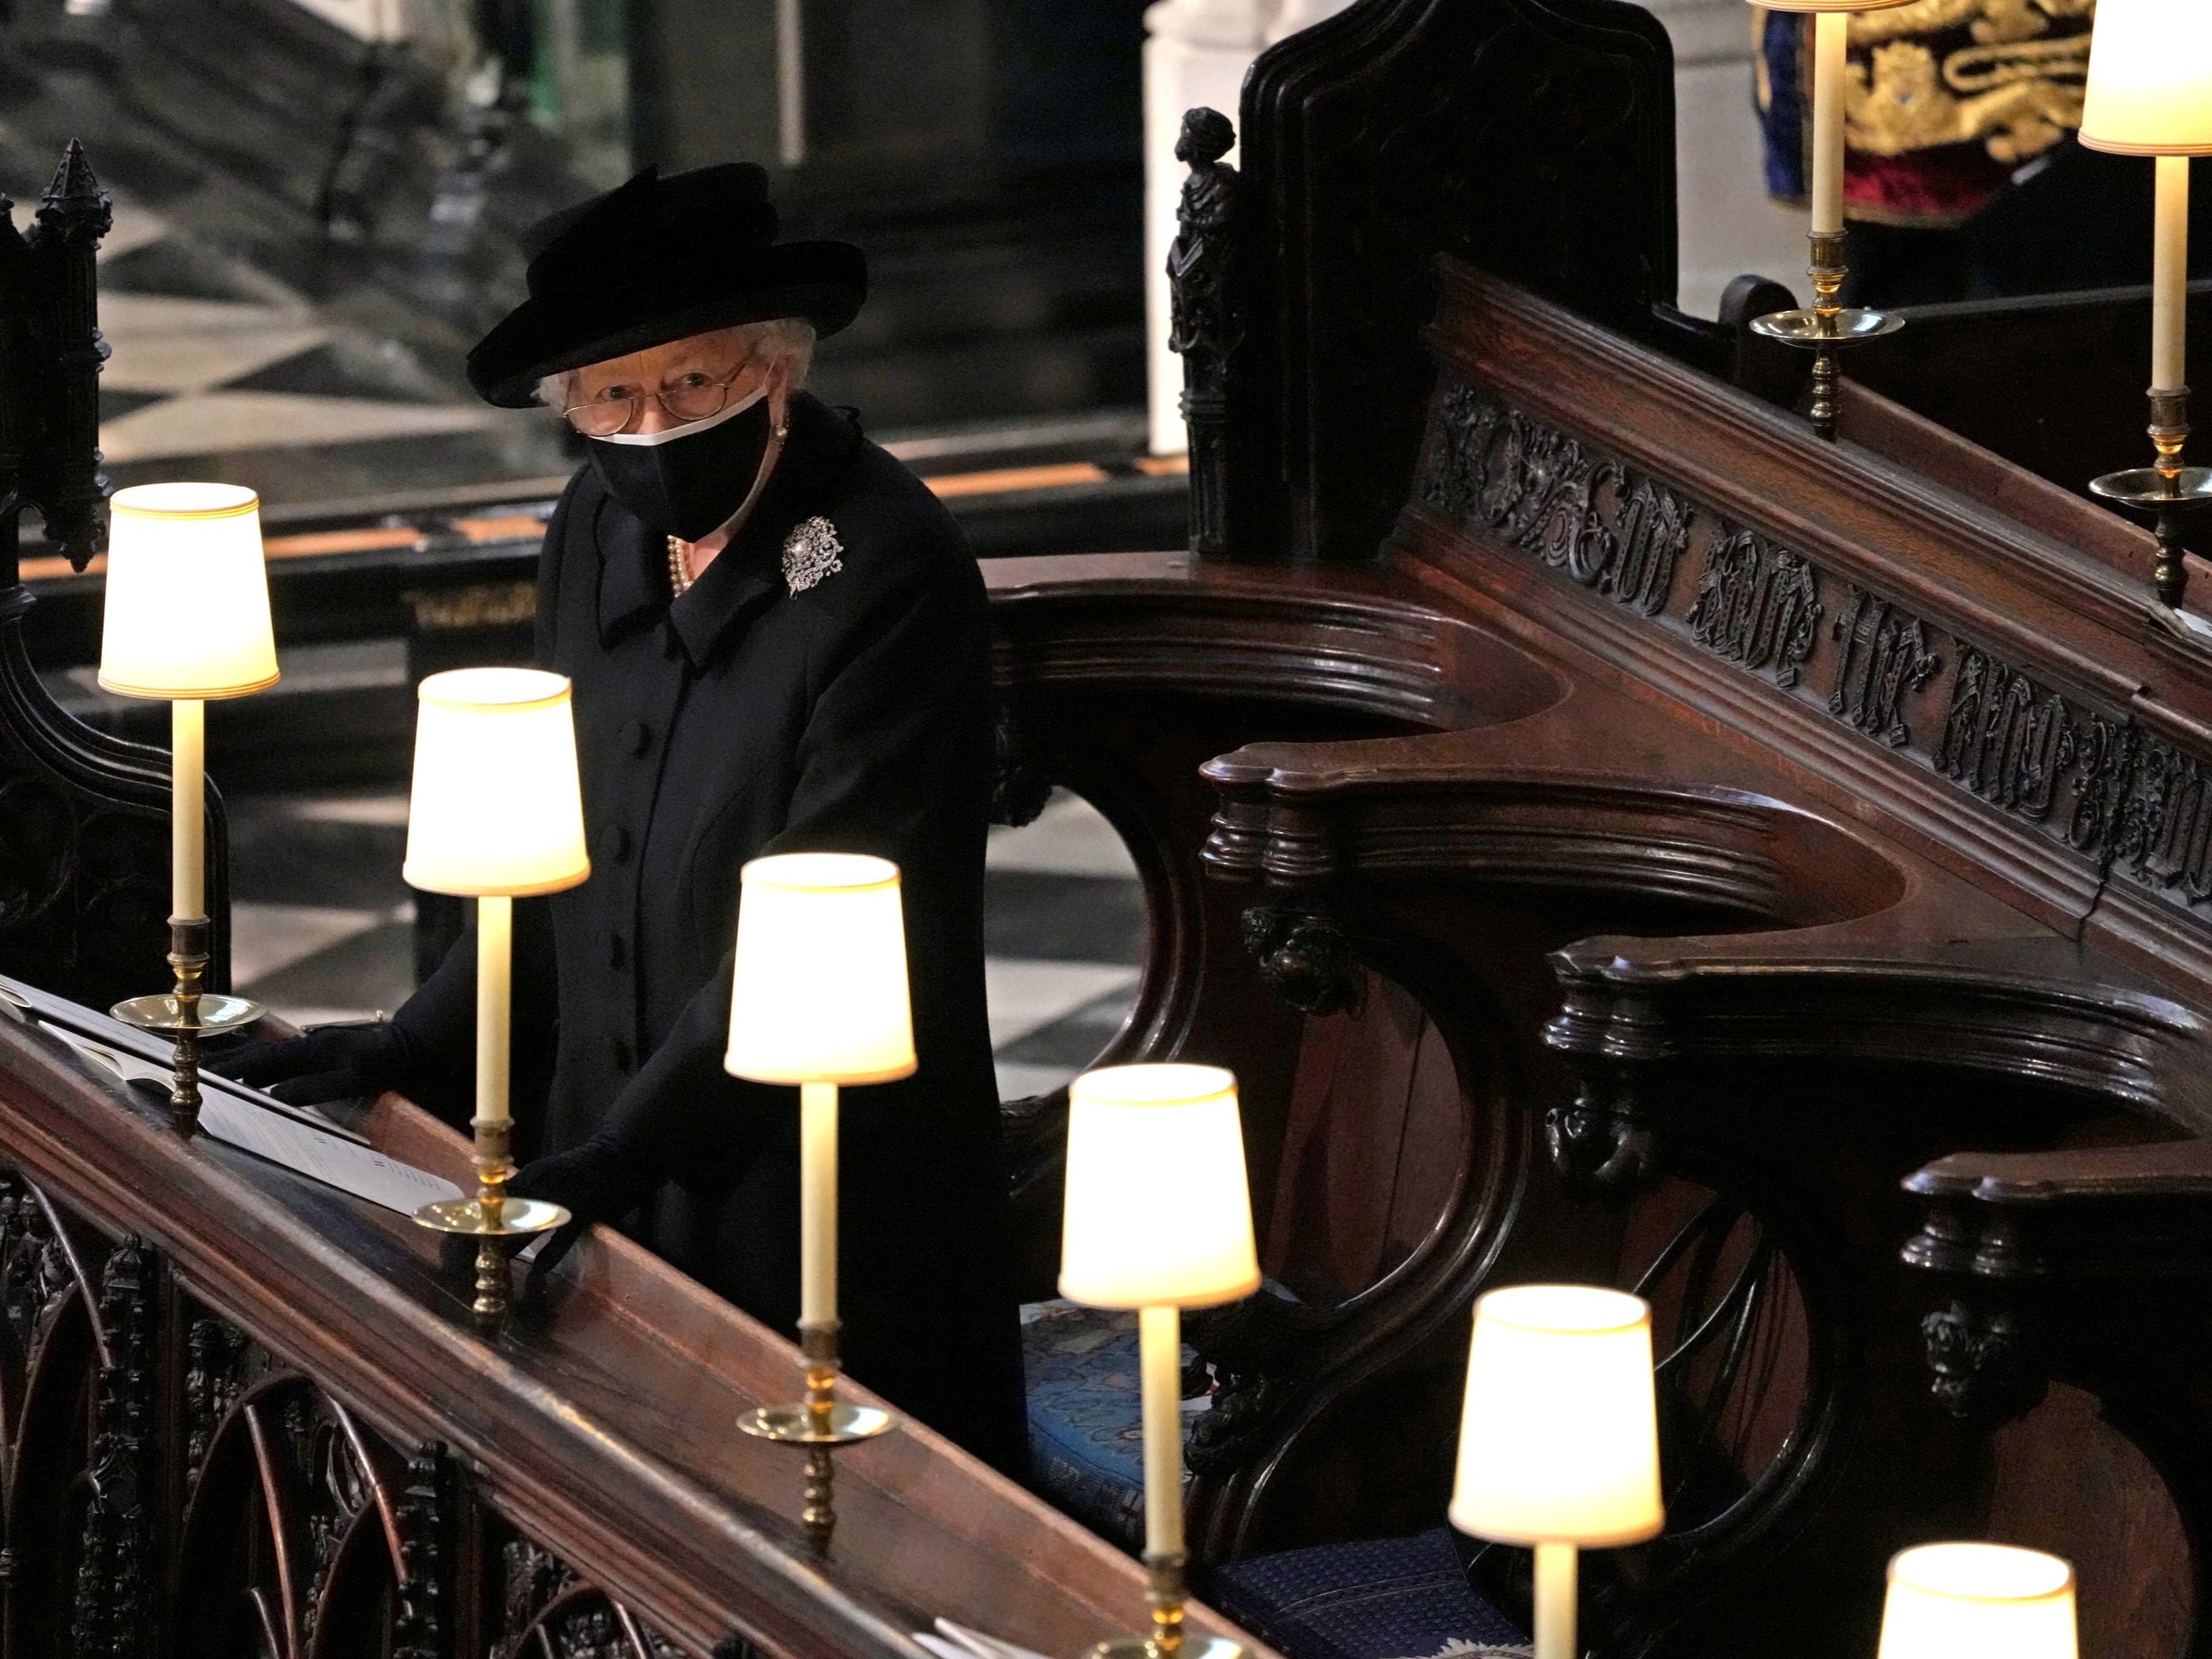 Queen Elizabeth is seen during the funeral of Prince Philip, her husband, who died at the age of 99 earlier this month